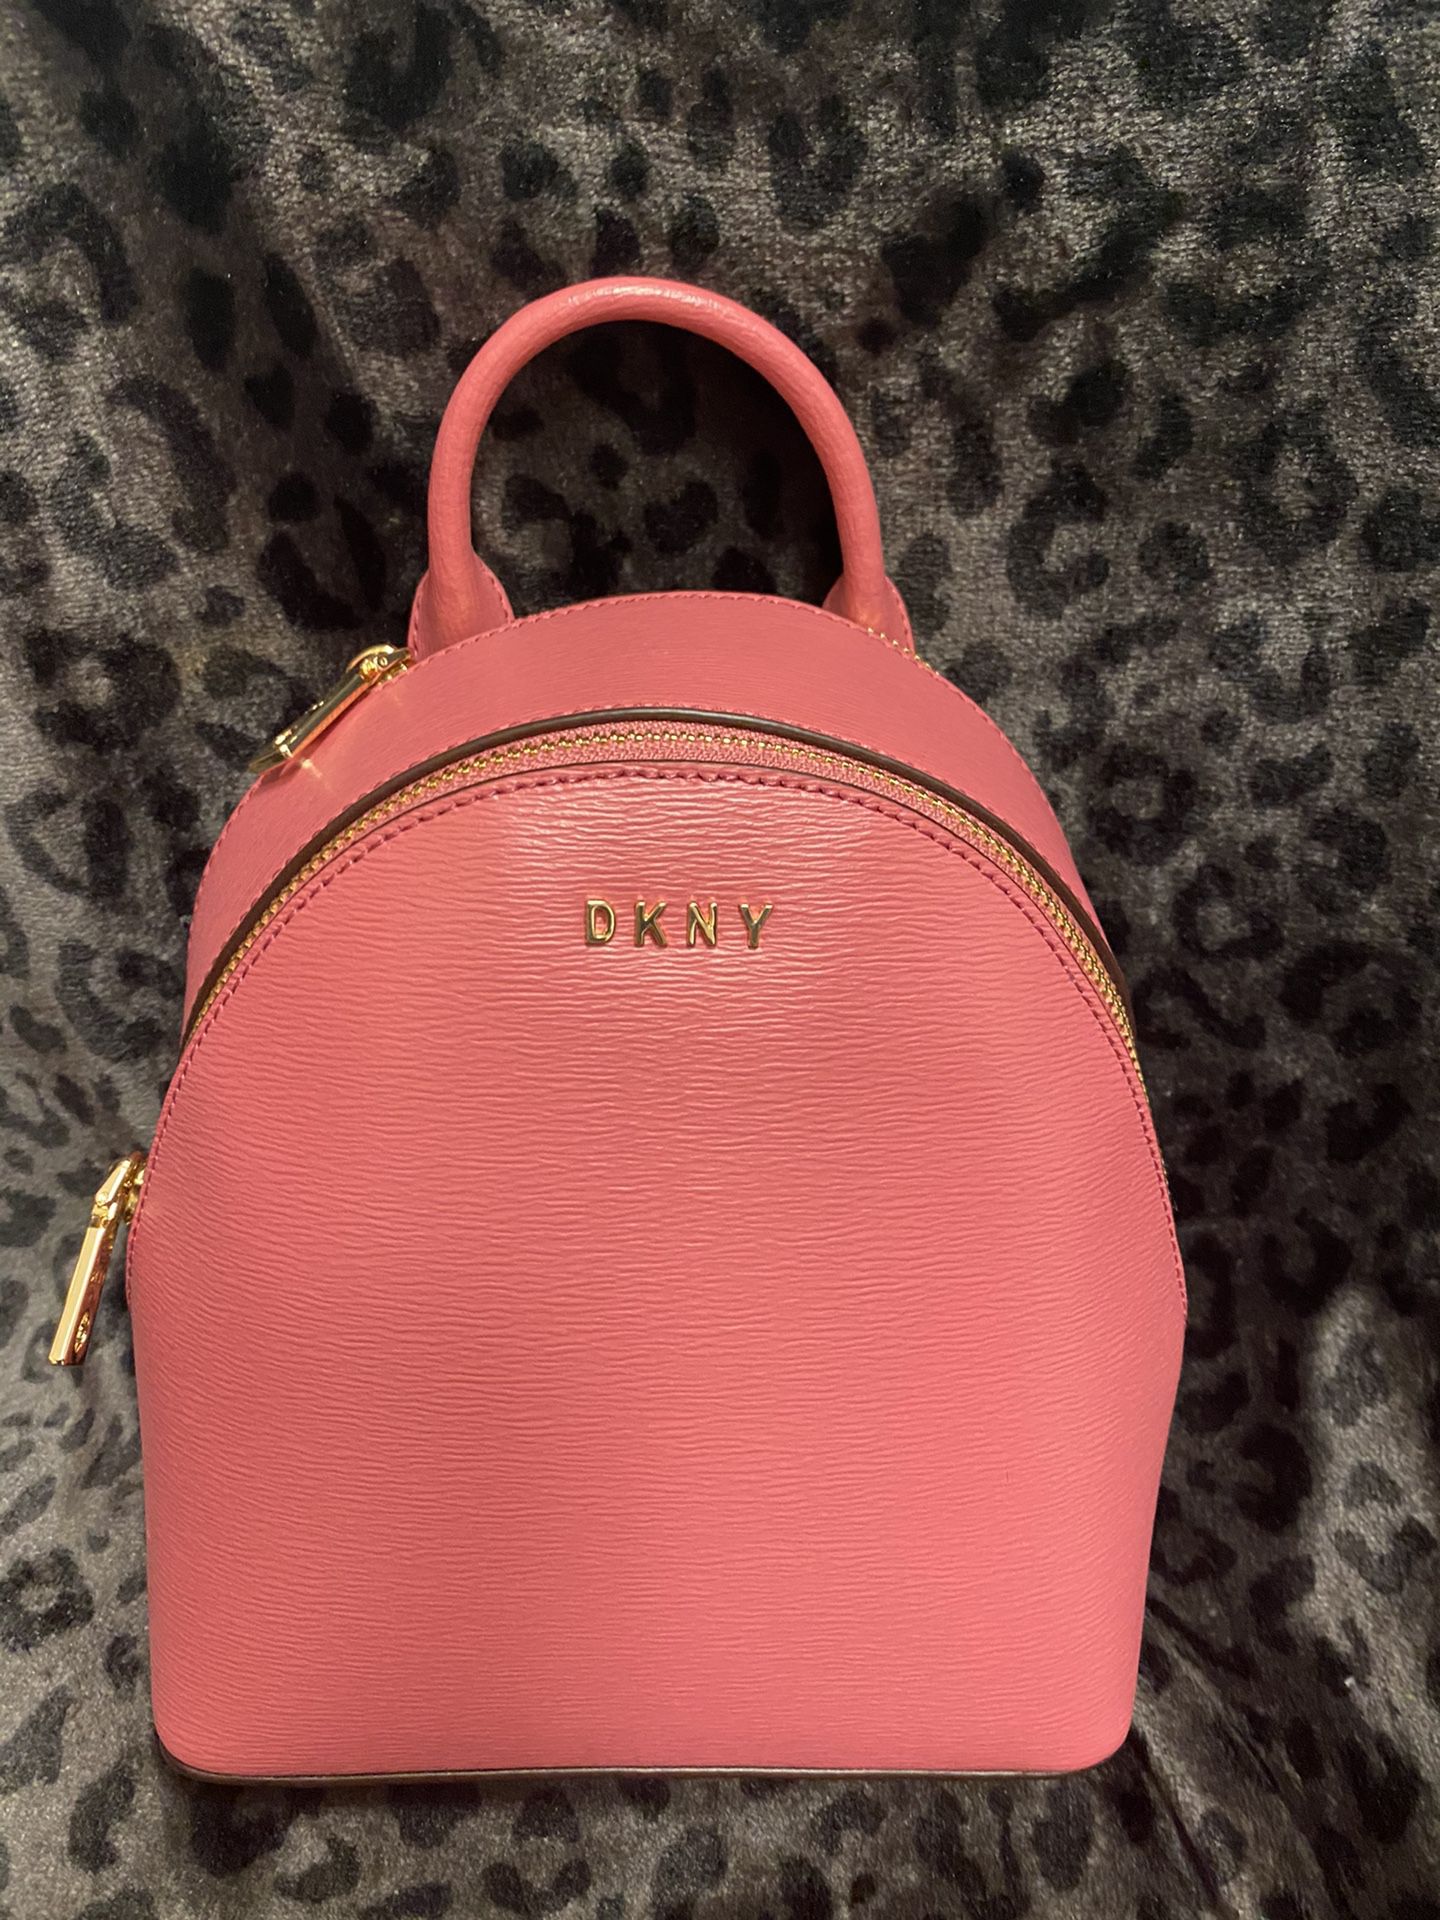 Backpack By Dkny Size: Small